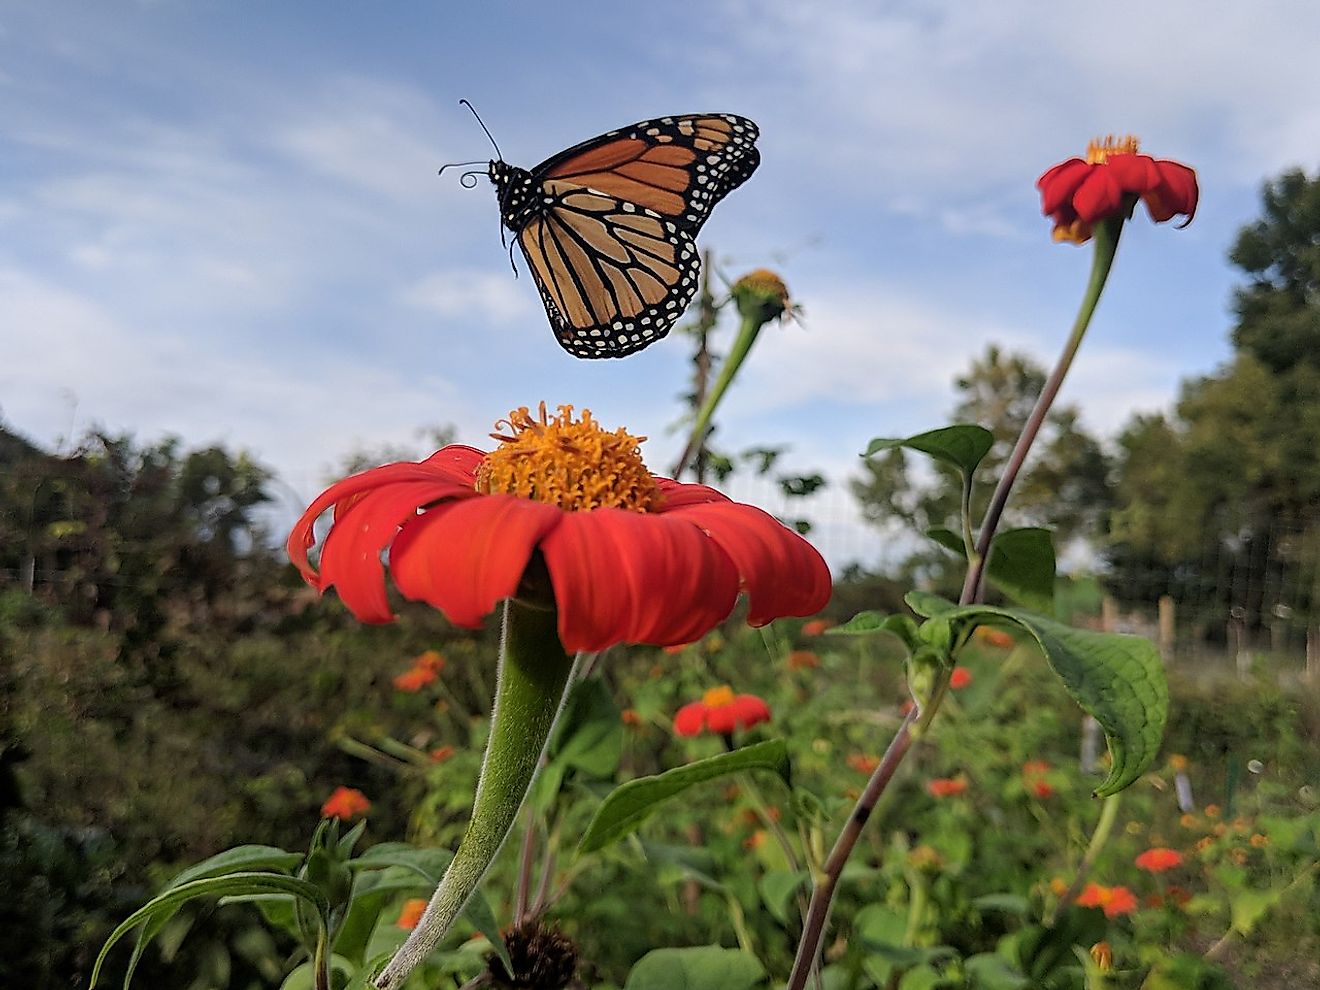 Monarch flying away from a Mexican sunflower. Image credit: Rbreidbrown/Wikimedia.org